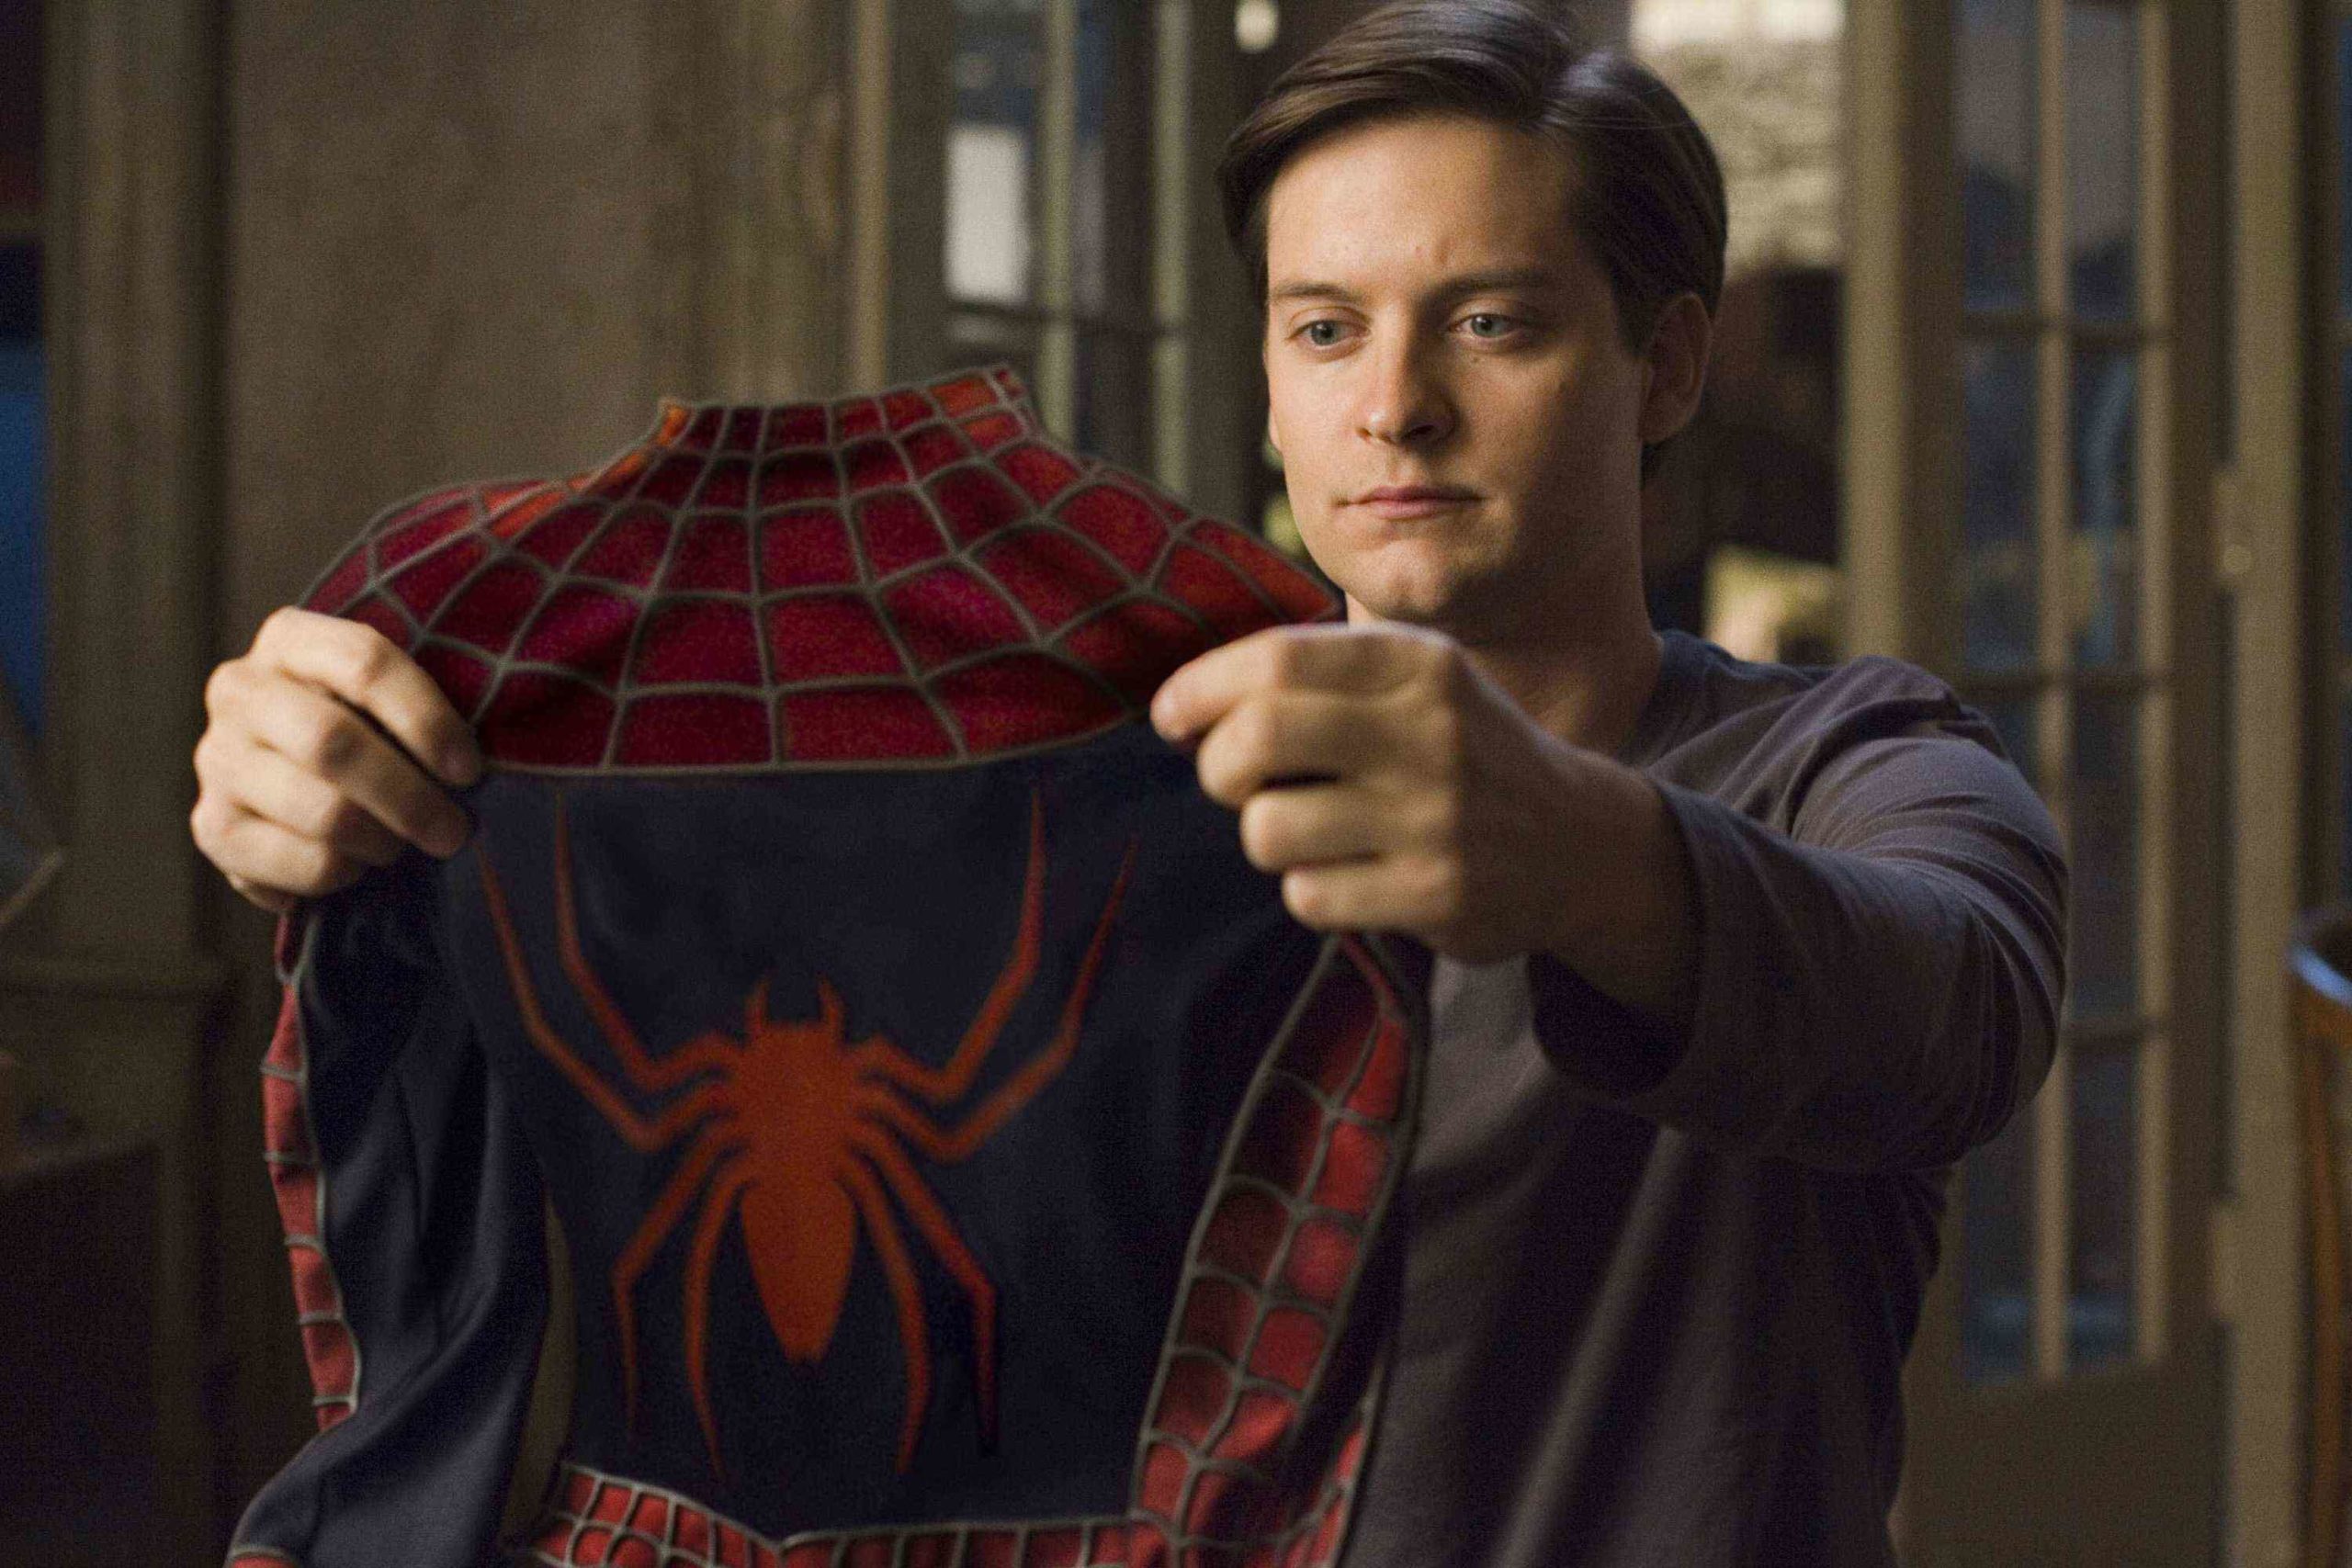 Sam Raimi On Spider-Man 4 - Why It Wasn't Made -Whether He'd Make It Now?